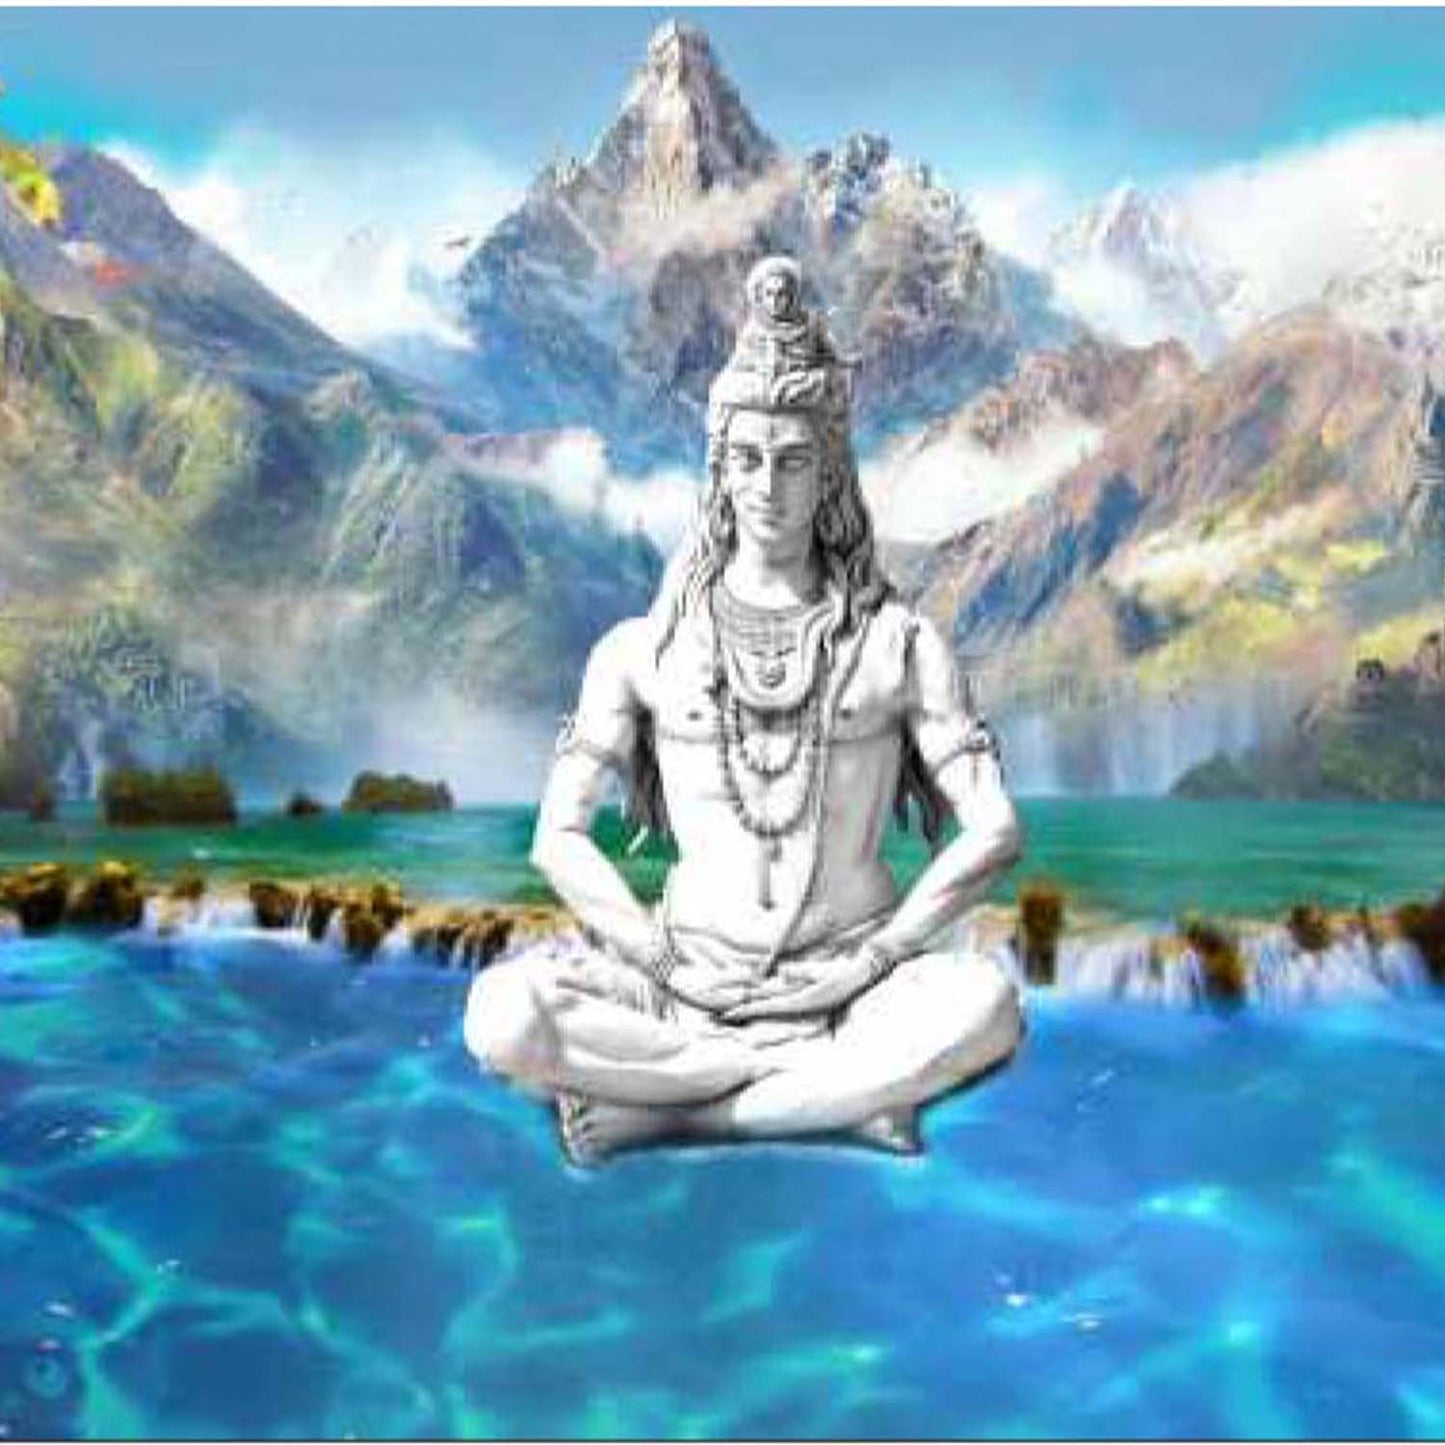 Lord Shiva 3D Wallpaper Print, Customize/ Personalized Wallpaper for Smart Home Office